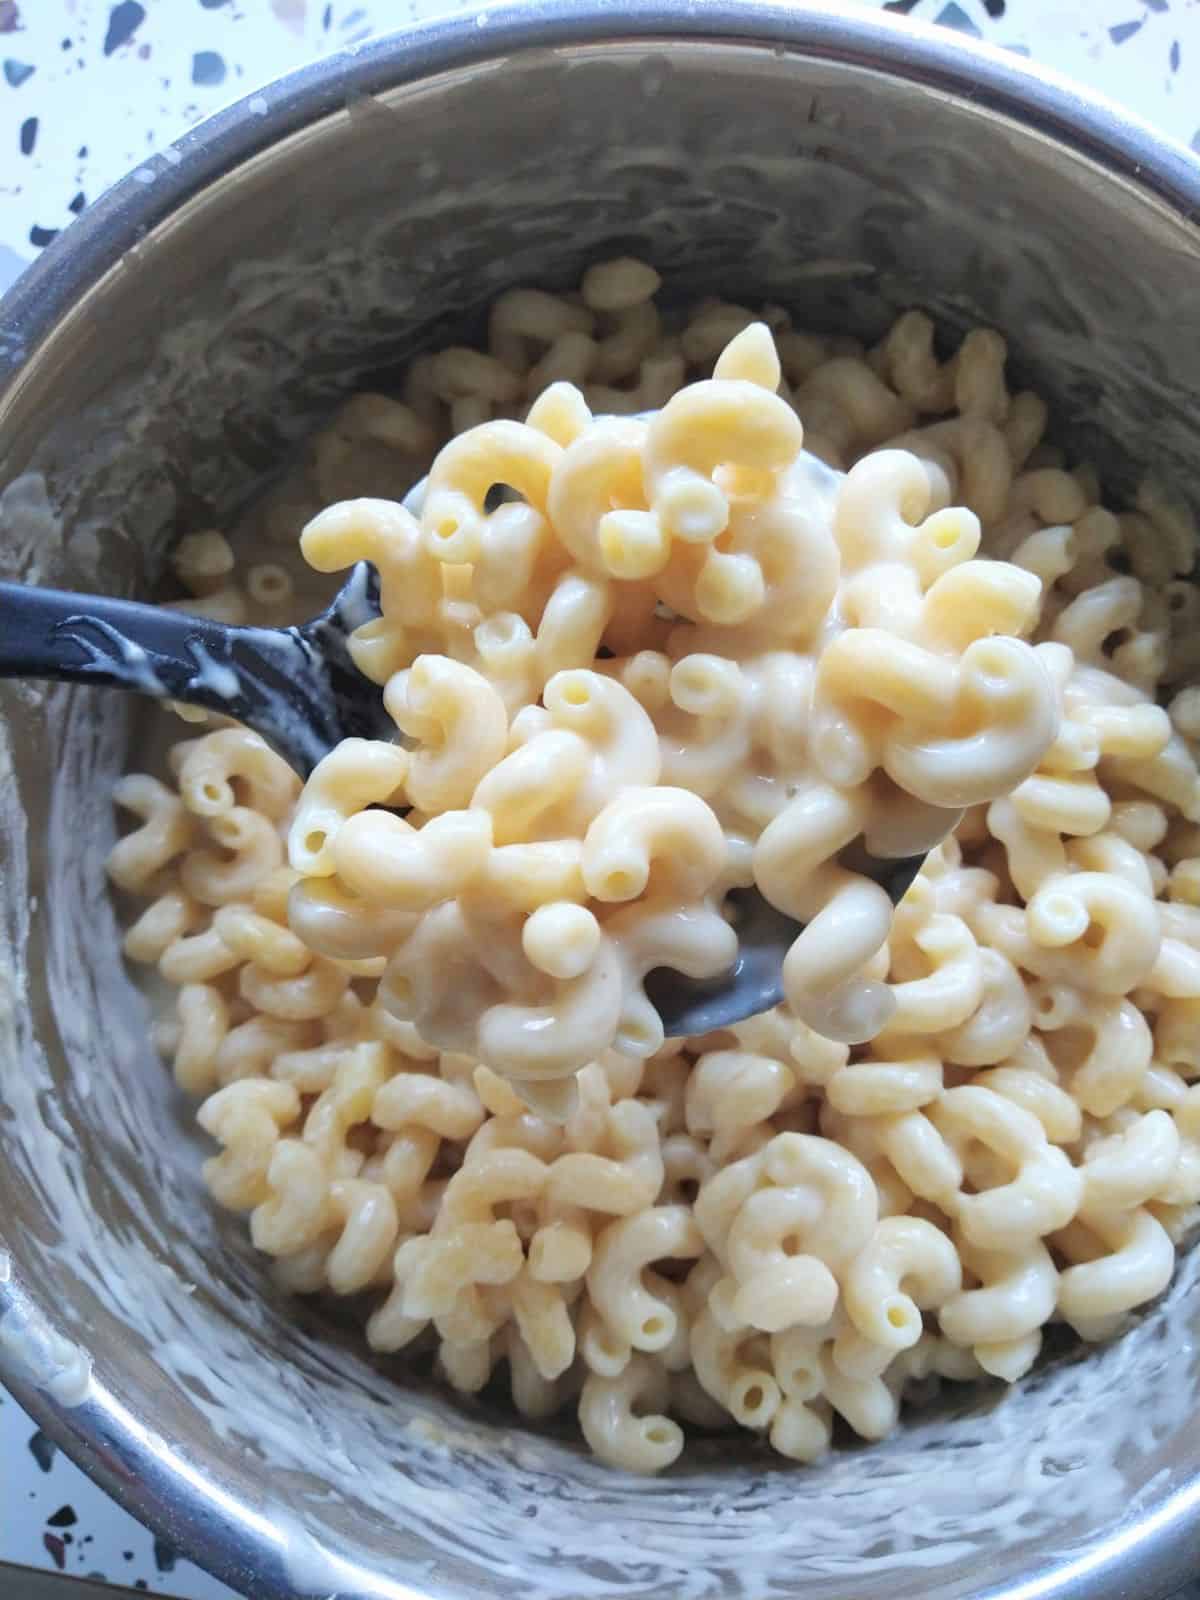 A spoon full of mac & cheese made with Butterkase cheese. The spoon is being held above the pot of mac & cheese.